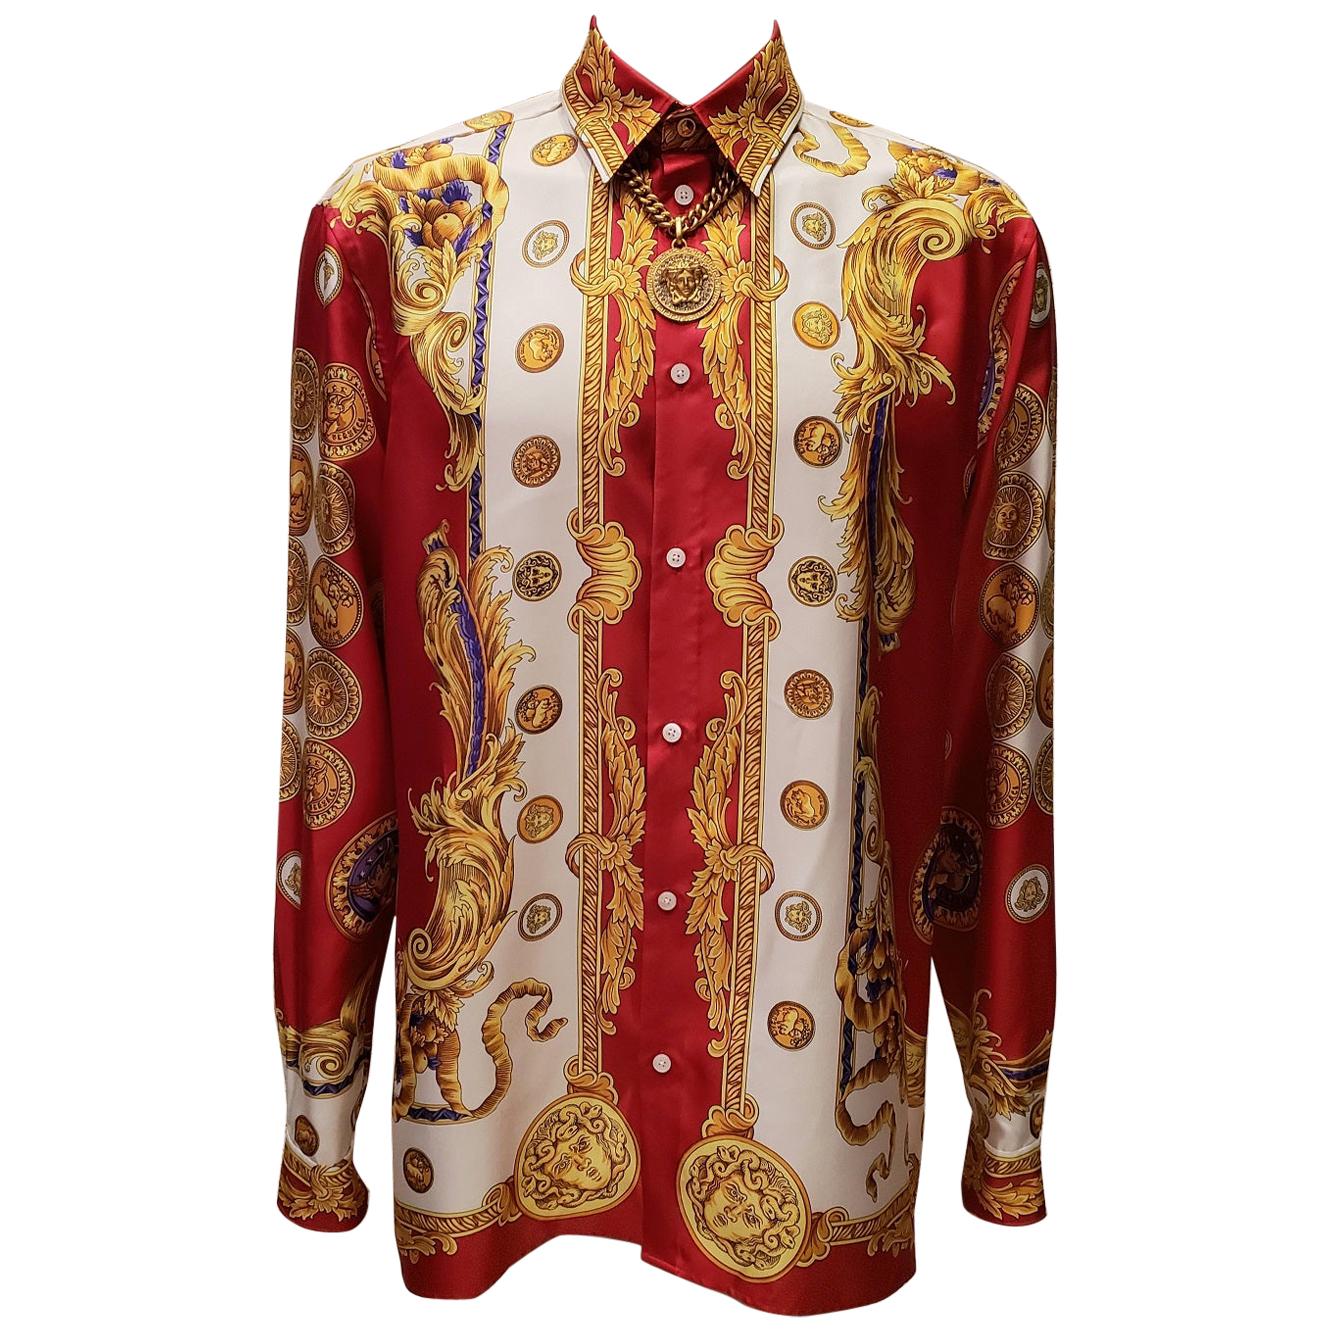 NEW VERSACE LUNAR NEW YEAR LIMITED EDITION SILK SHIRT Size 50 - L